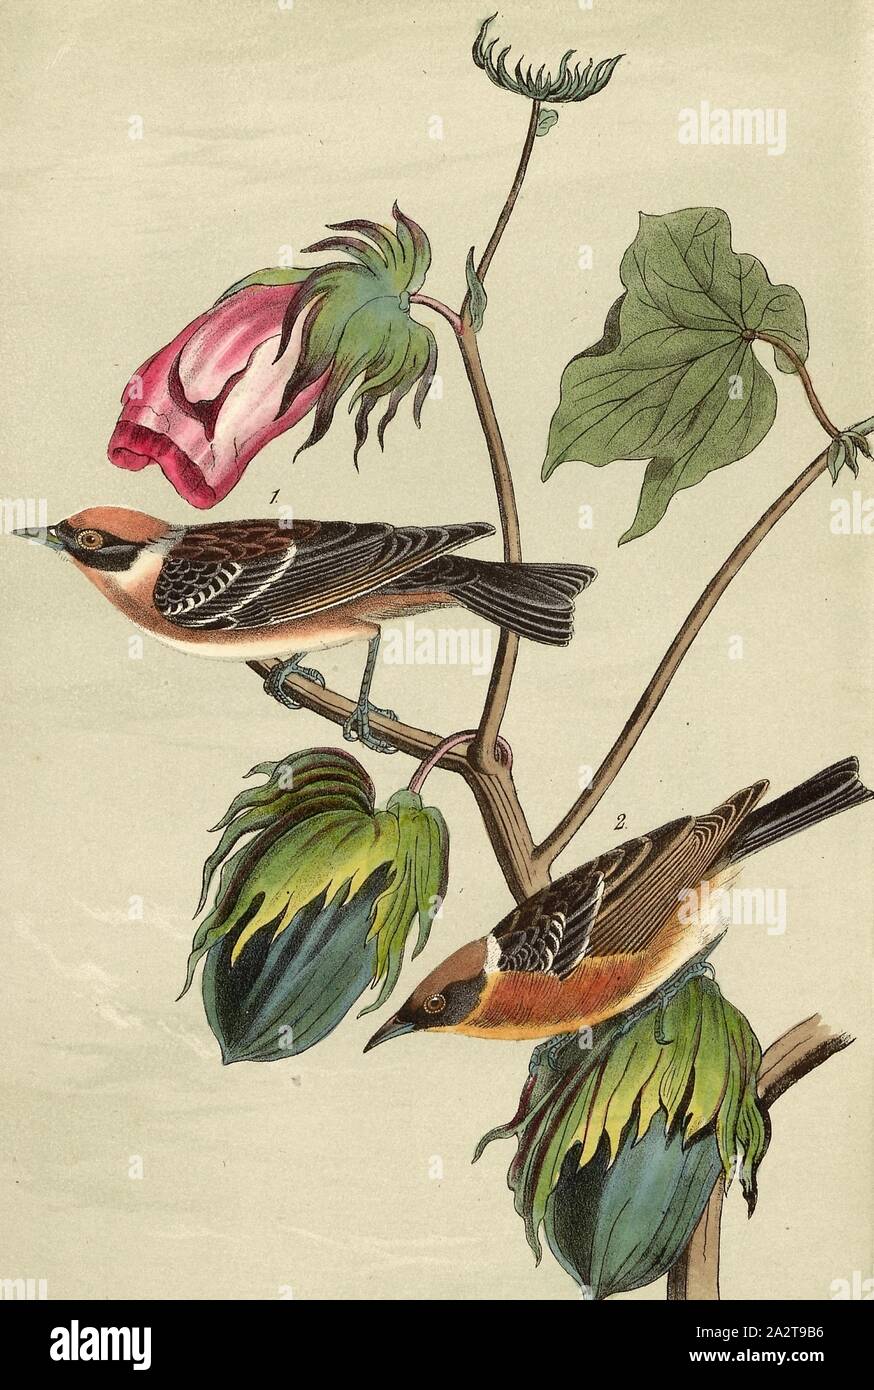 Bay-Breasted Wood-Warbler - Highland Cotton-plant, Gossipium herbaceum, Brown-breasted Warbler (Dendroica castanea, Sylvicola castanea), Signed: J.J. Audubon, J.T. Bowen, lithograph, Pl. 80 (vol. 2), Audubon, John James (drawn); Bowen, J. T. (lith.), 1856, John James Audubon: The birds of America: from drawings made in the United States and their territories. New York: Audubon, 1856 Stock Photo